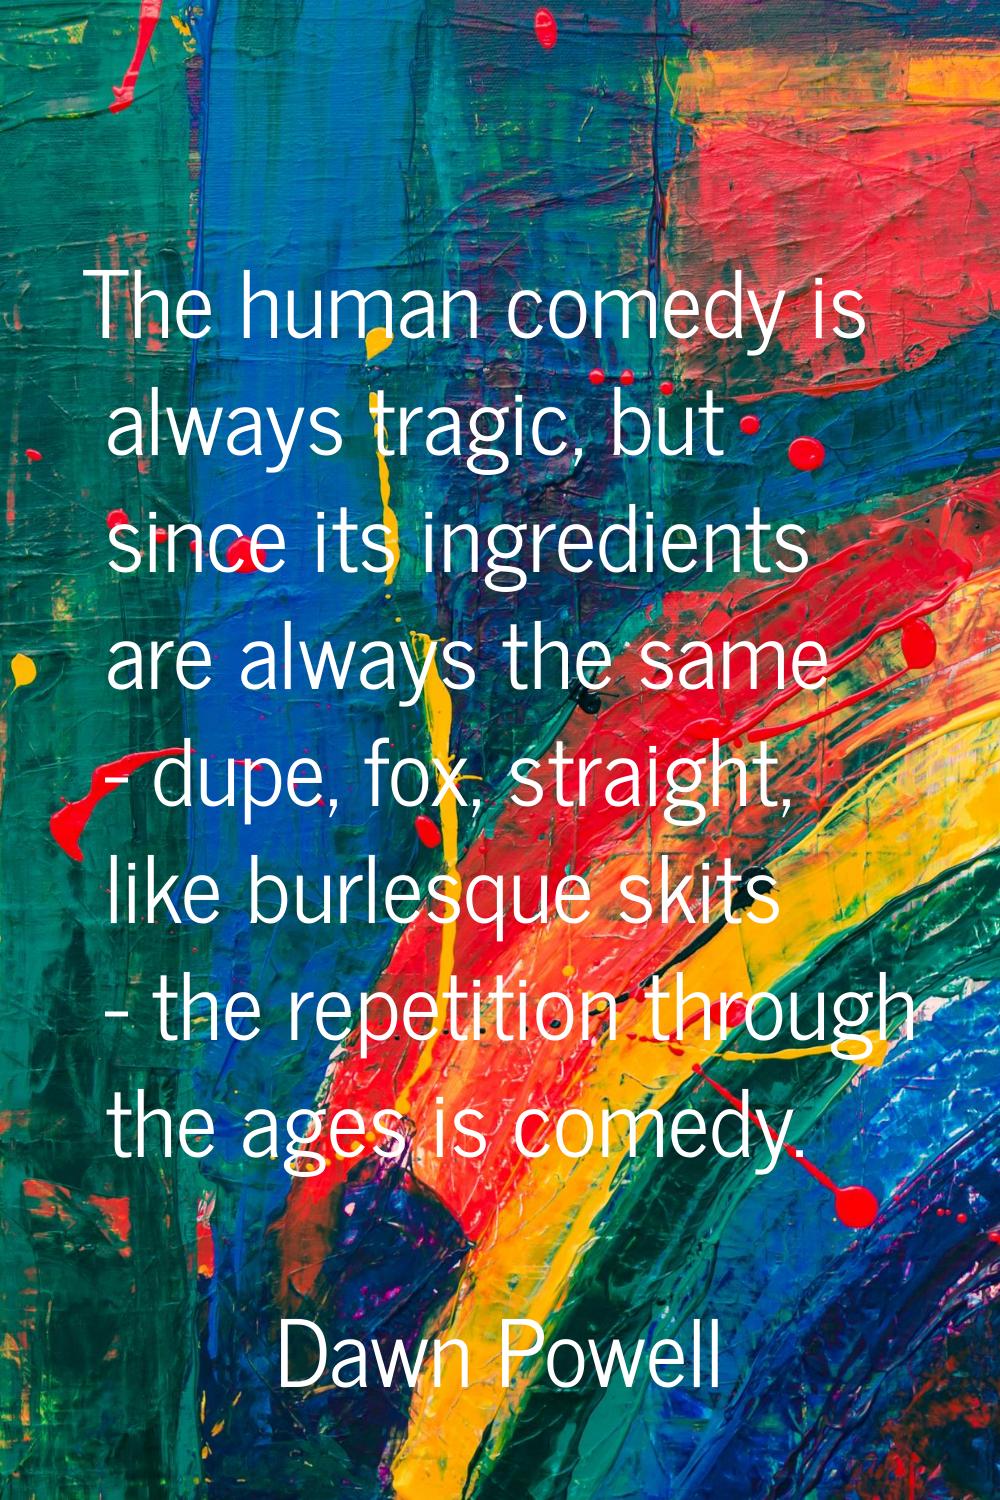 The human comedy is always tragic, but since its ingredients are always the same - dupe, fox, strai